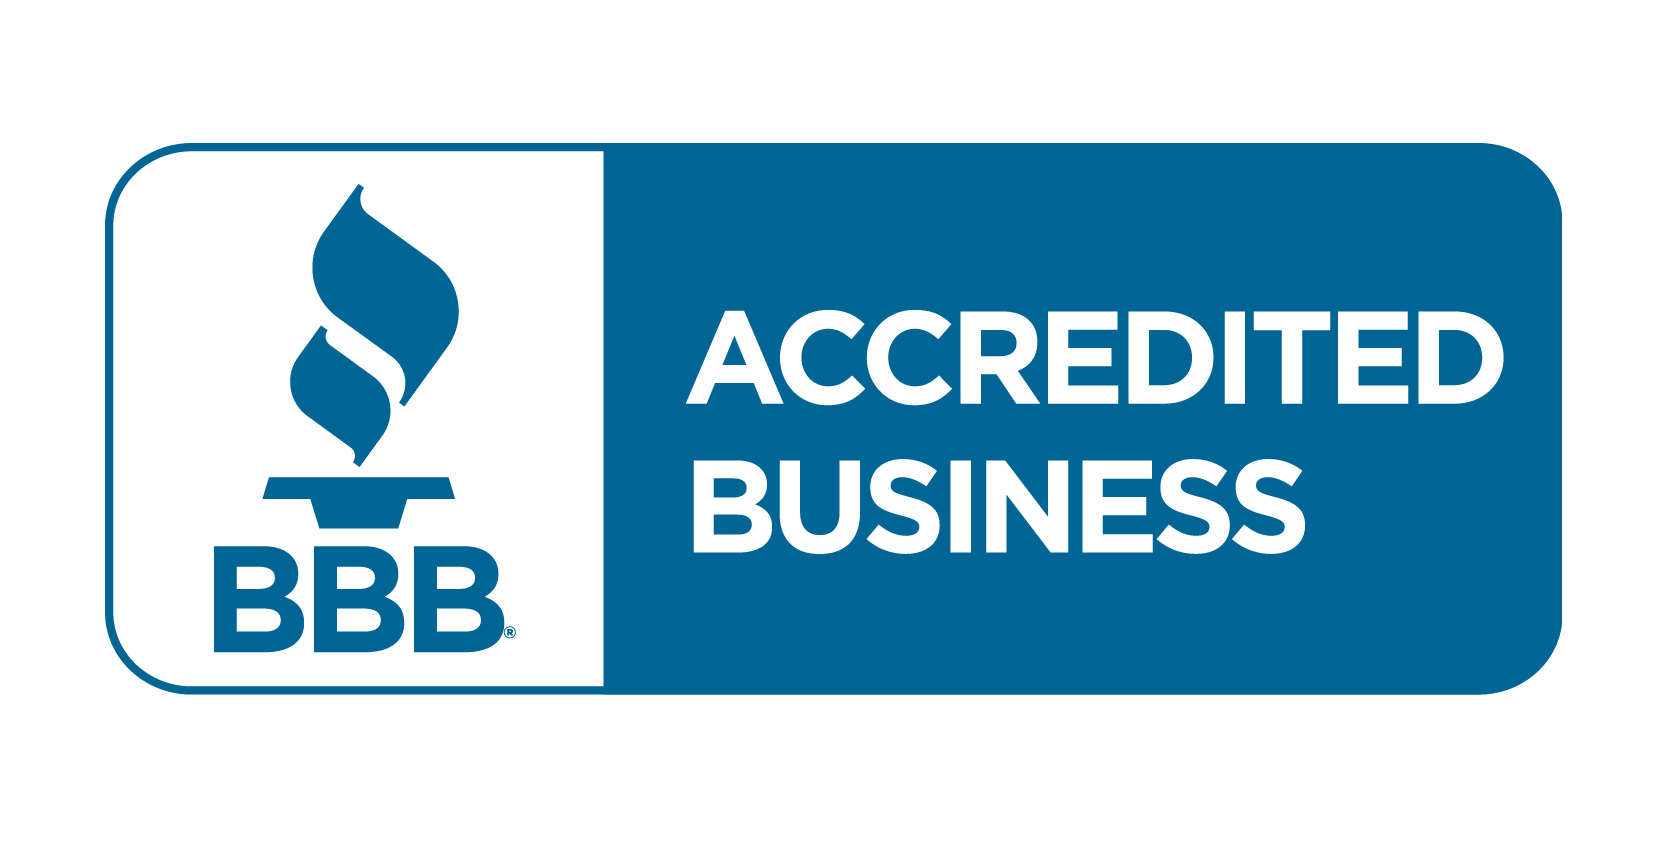 the bbb logo is blue and white and says accredited business .